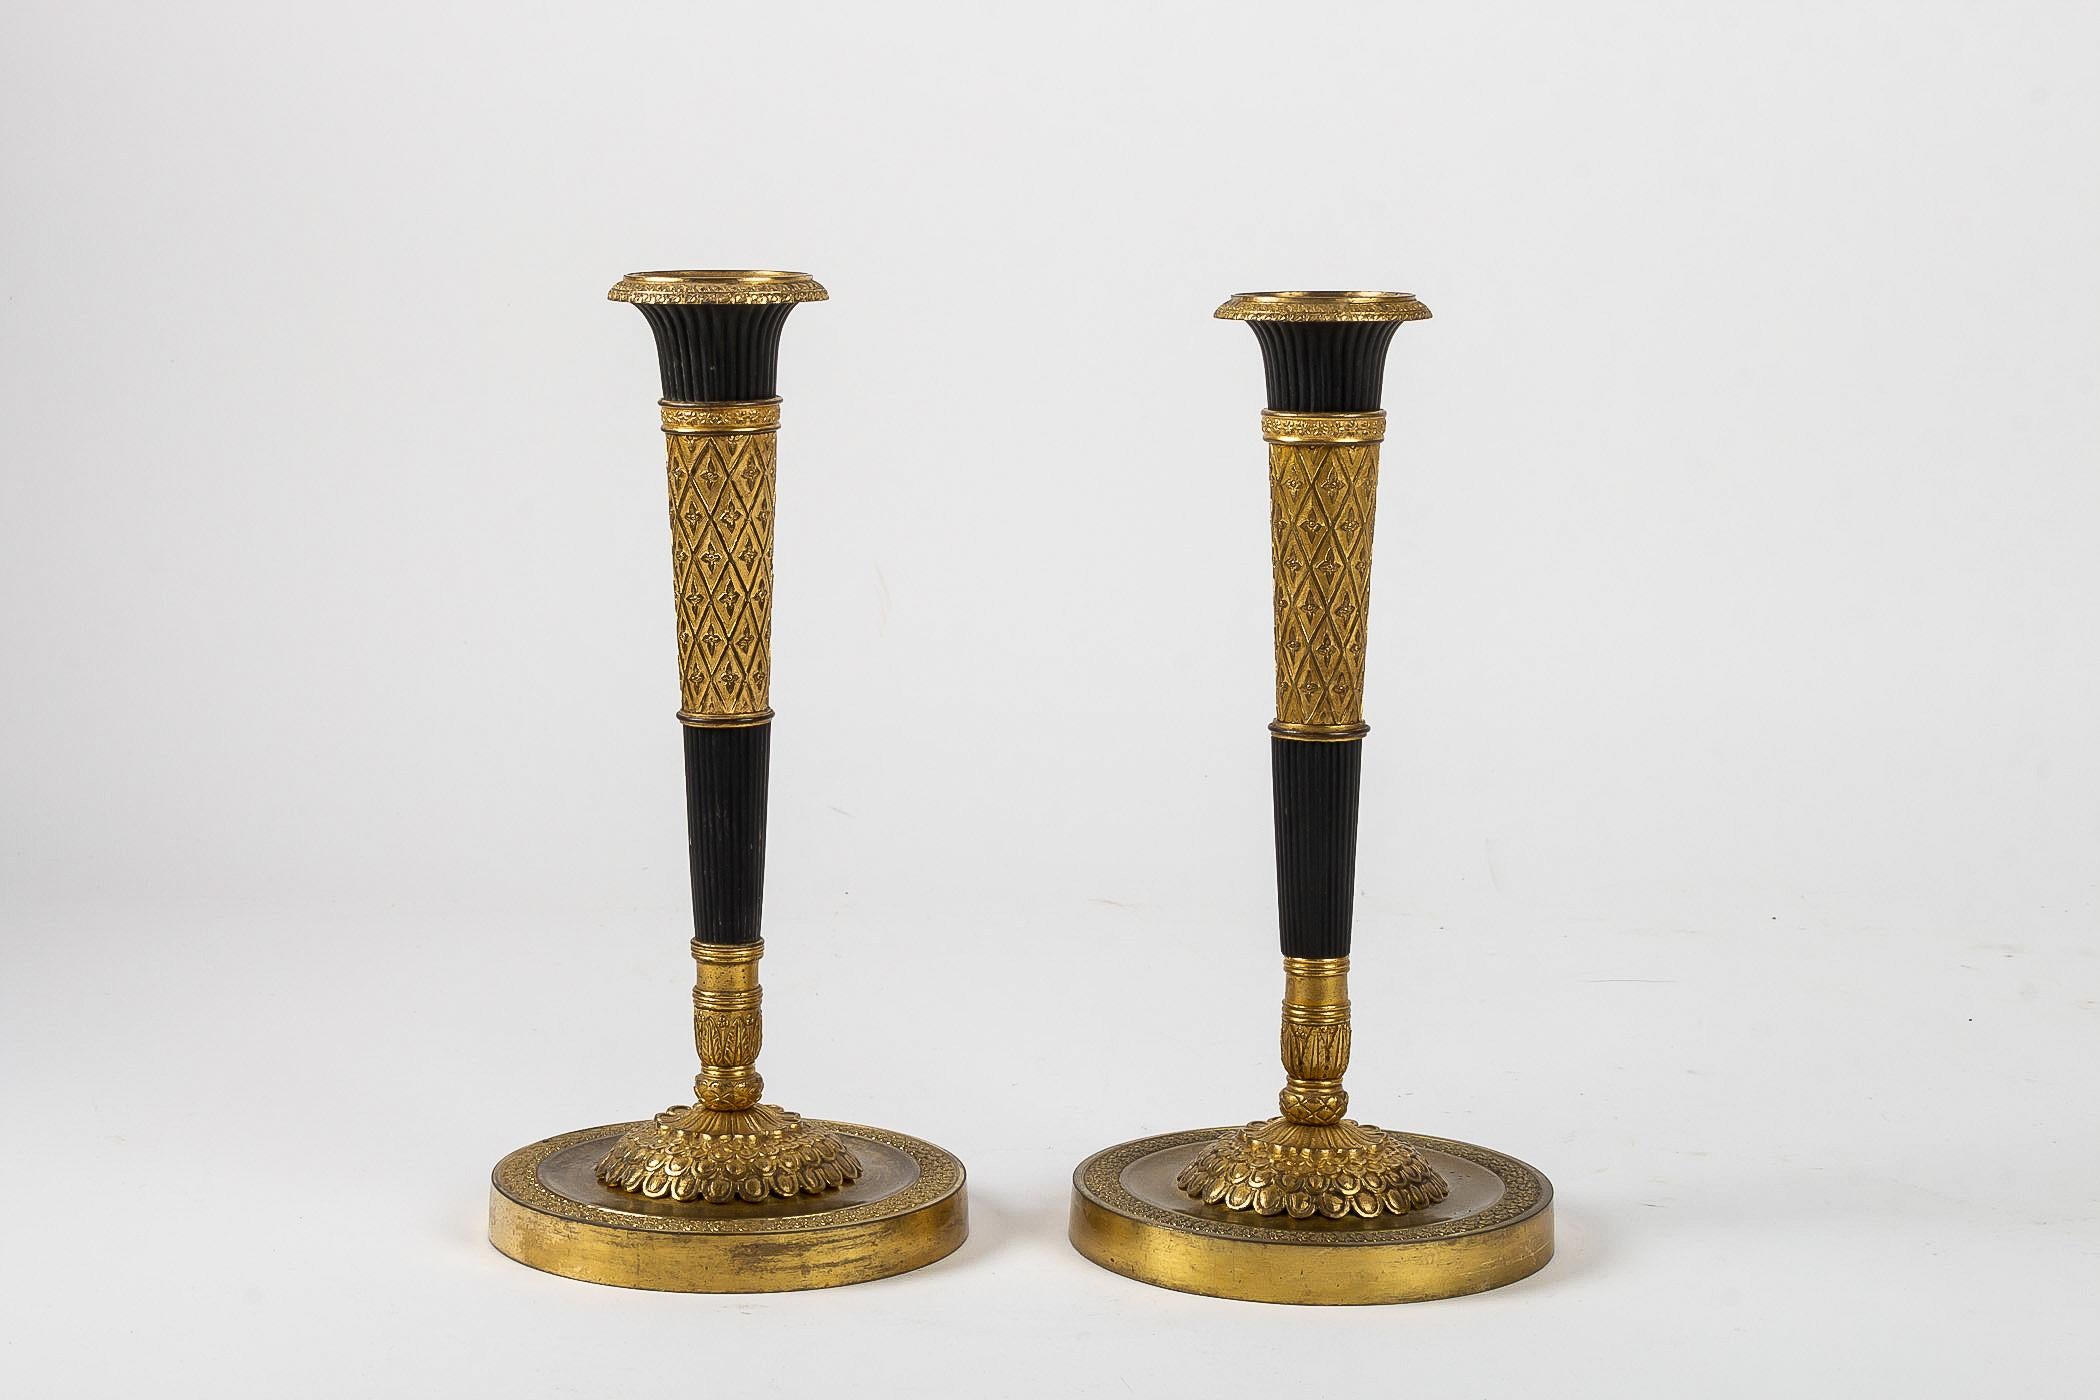 French Directoire period pair of French candlesticks, circa 1798

A rare, elegant and decorative pair of gilt-bronze and patinated-bronze candlesticks, nicely chiseled of stars.

Beautiful French work late 18th century, Directoire period, circa